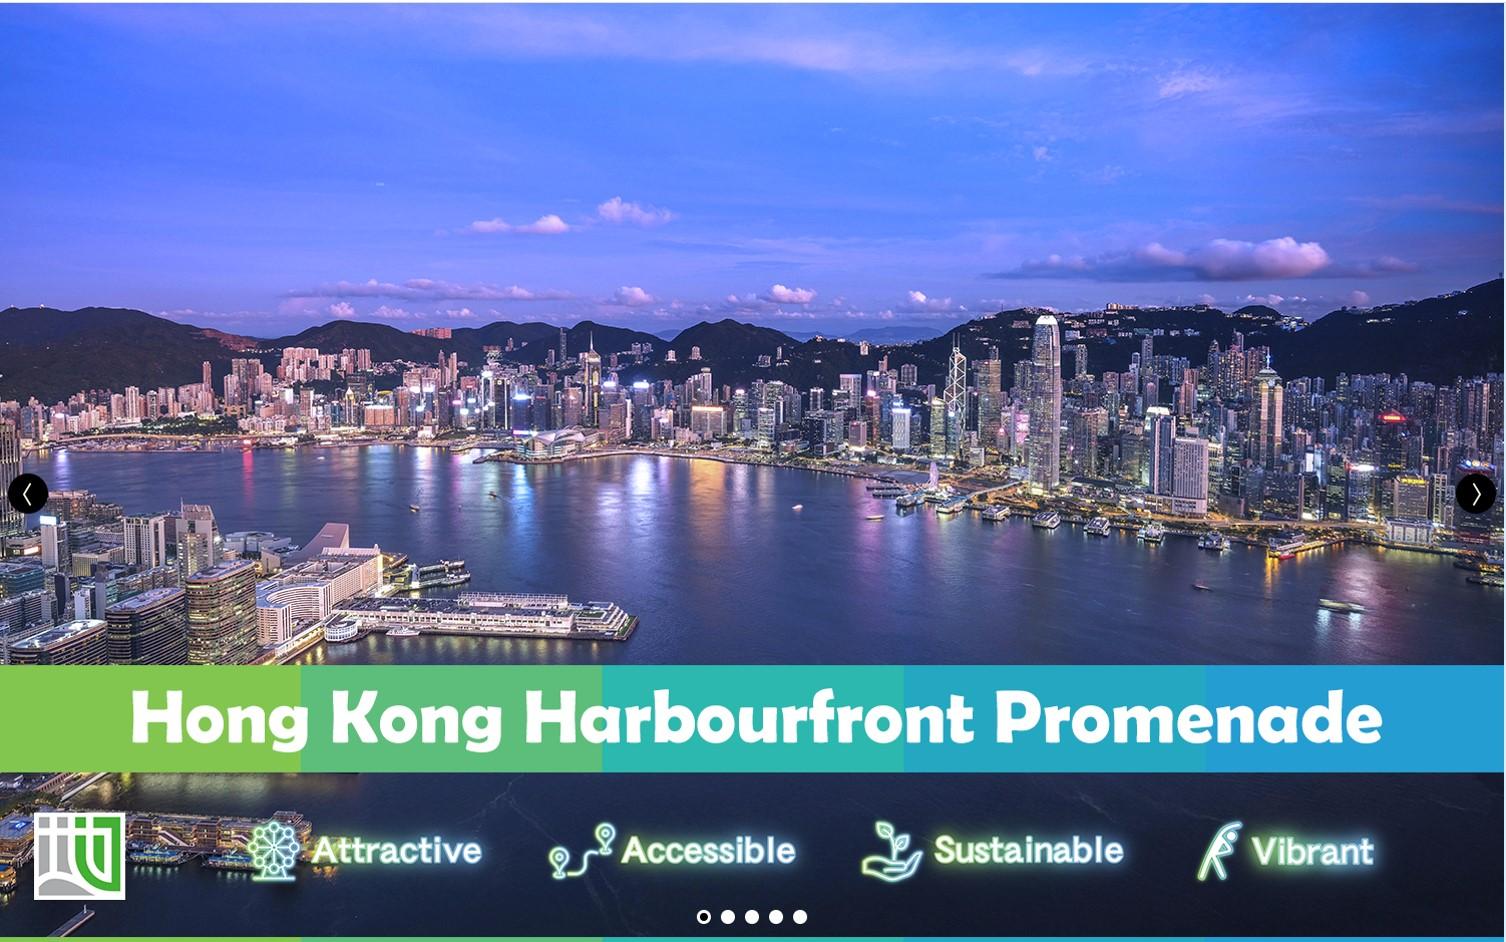 The "e-HongKongGuide" 2023, featuring the harbourfront promenades, is available for free download today (January 31).